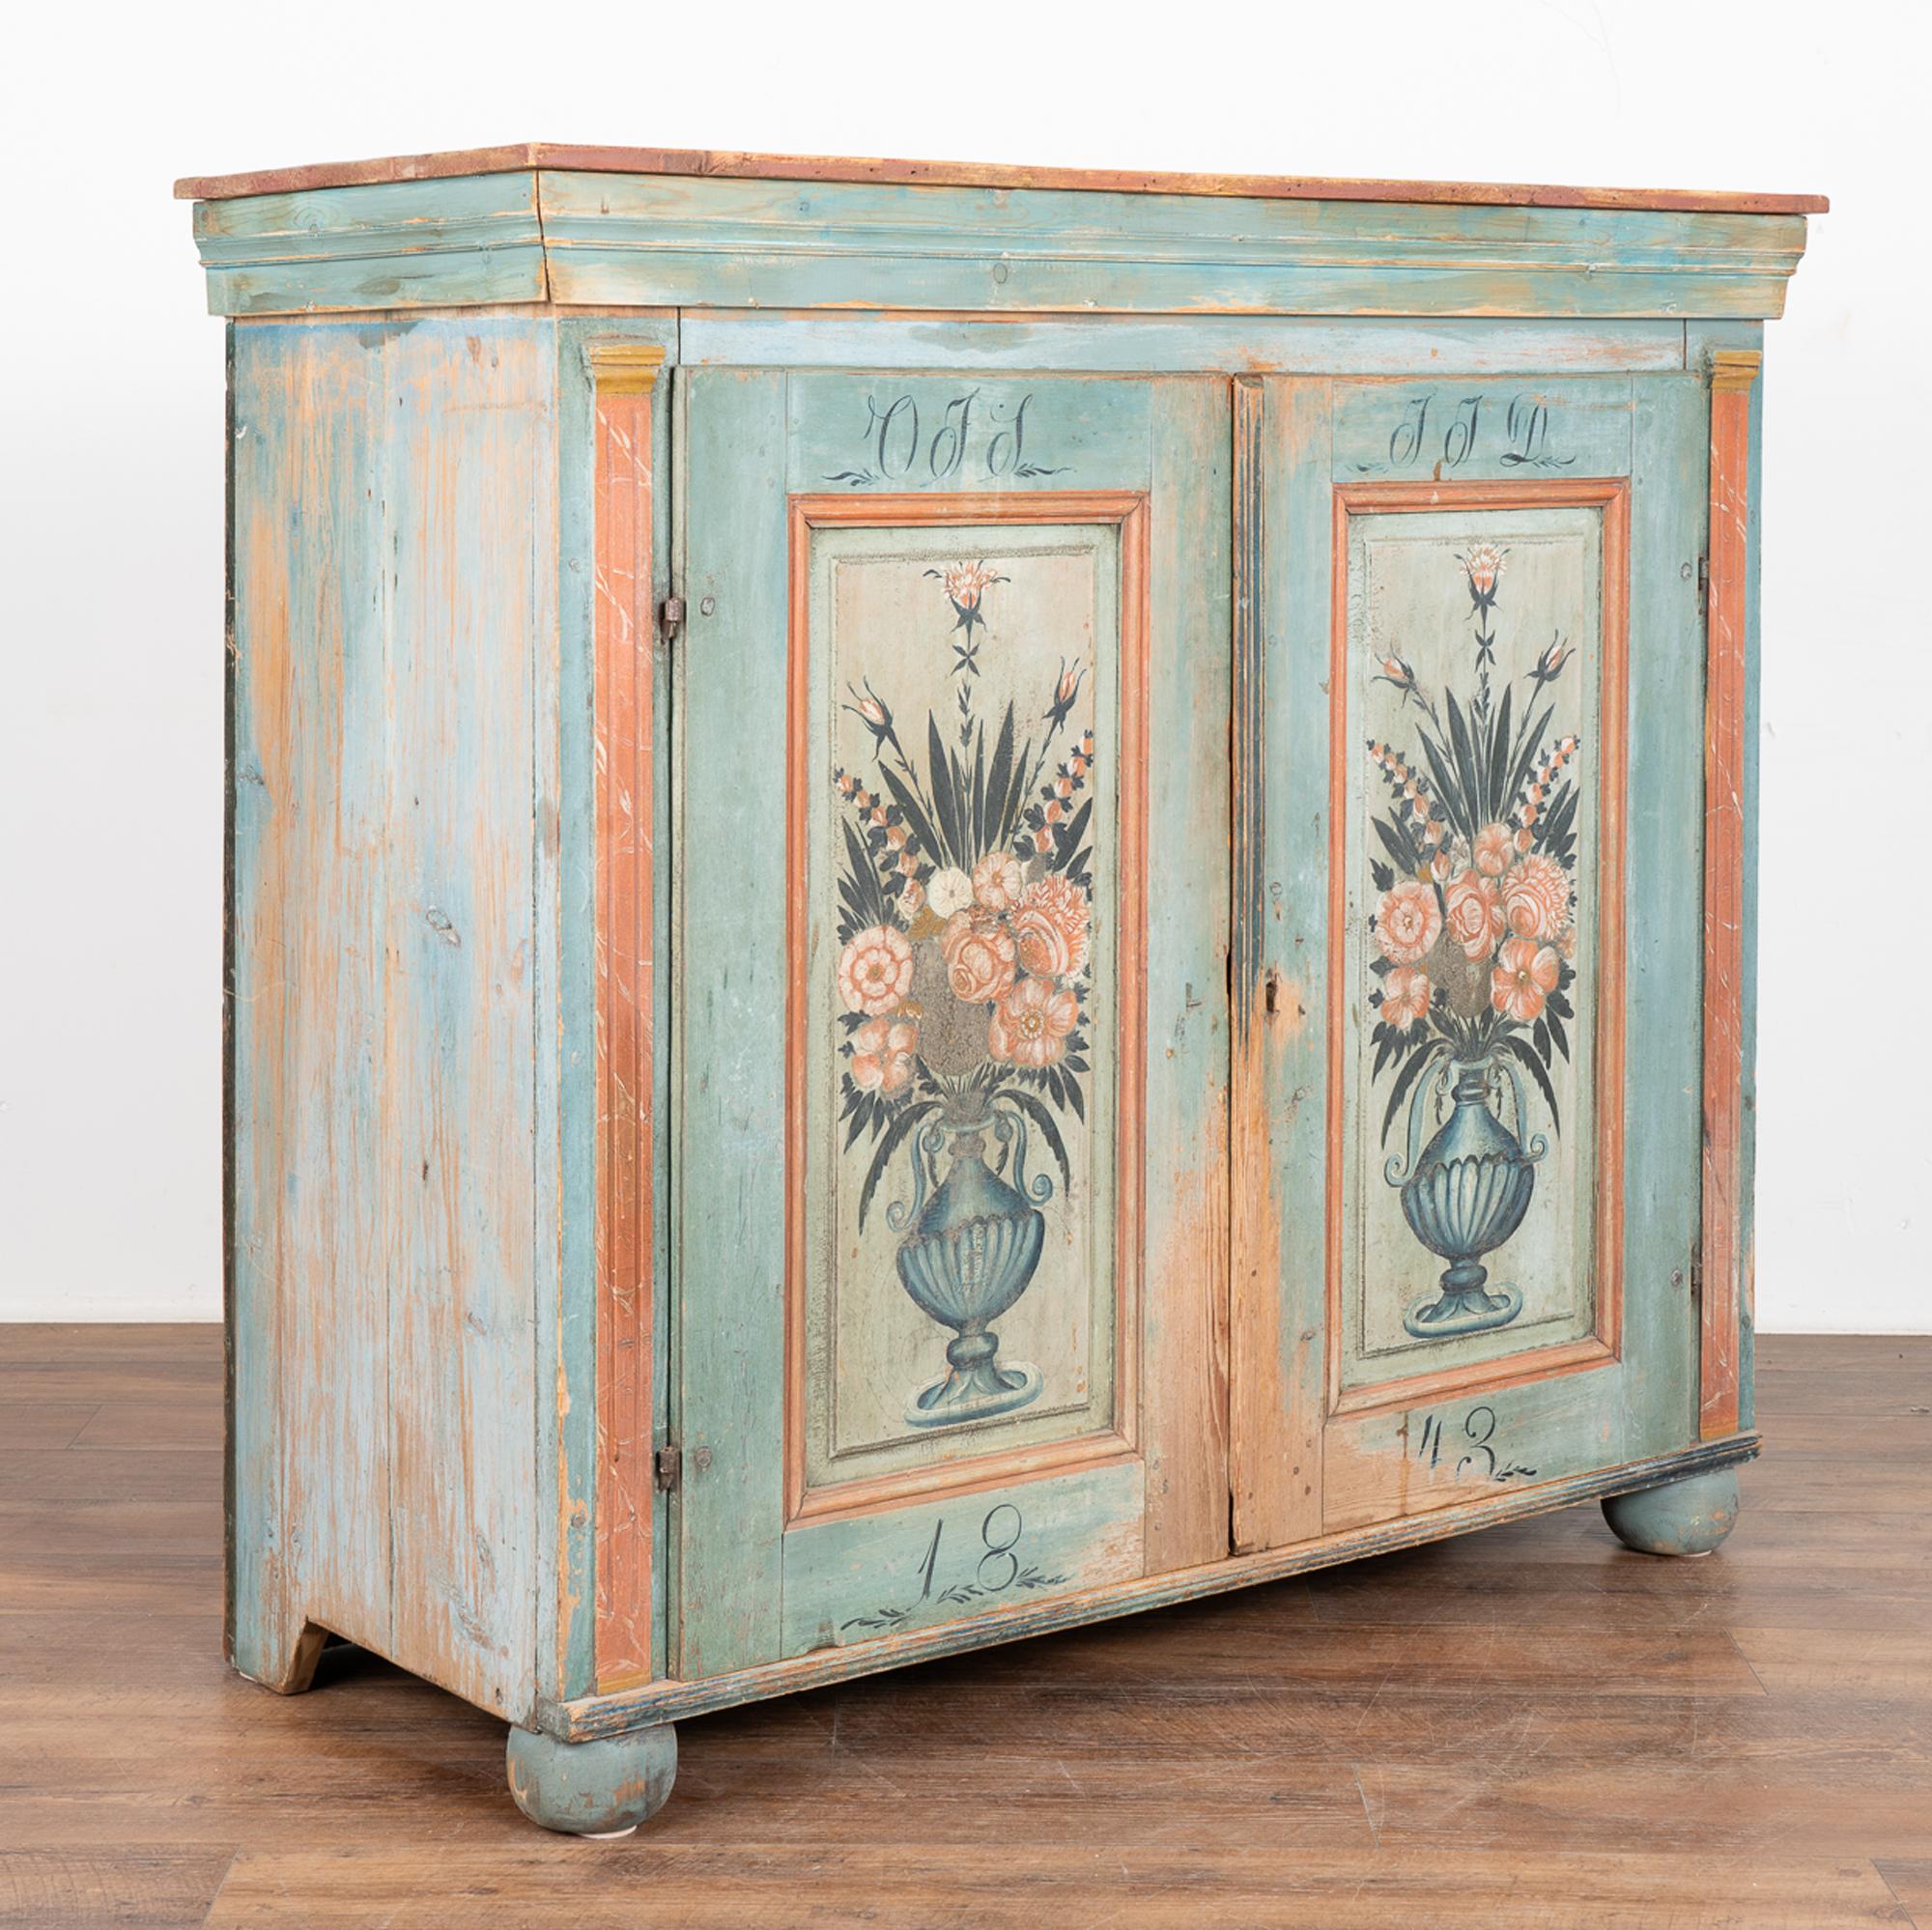 While you can frequently find original painted Swedish trunks, it is difficult to find a cabinet or sideboard with exceptional original folk art paint such as this one.
The two panel doors are painted with a traditional floral/vase motif against a